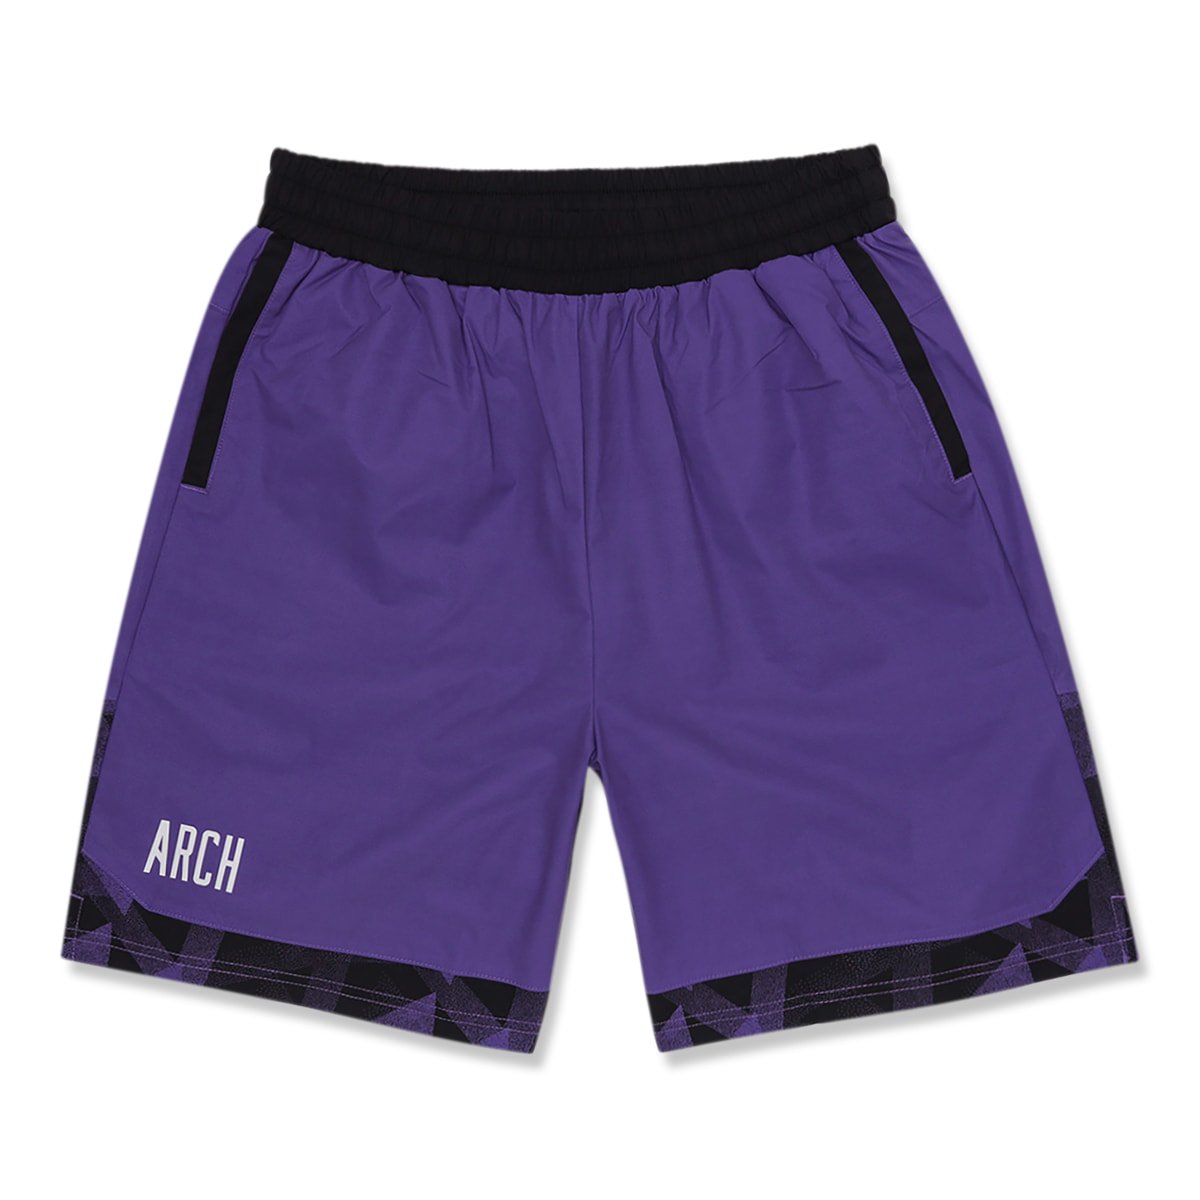 triangle overlay shorts【purple】 - Arch ☆ アーチ 